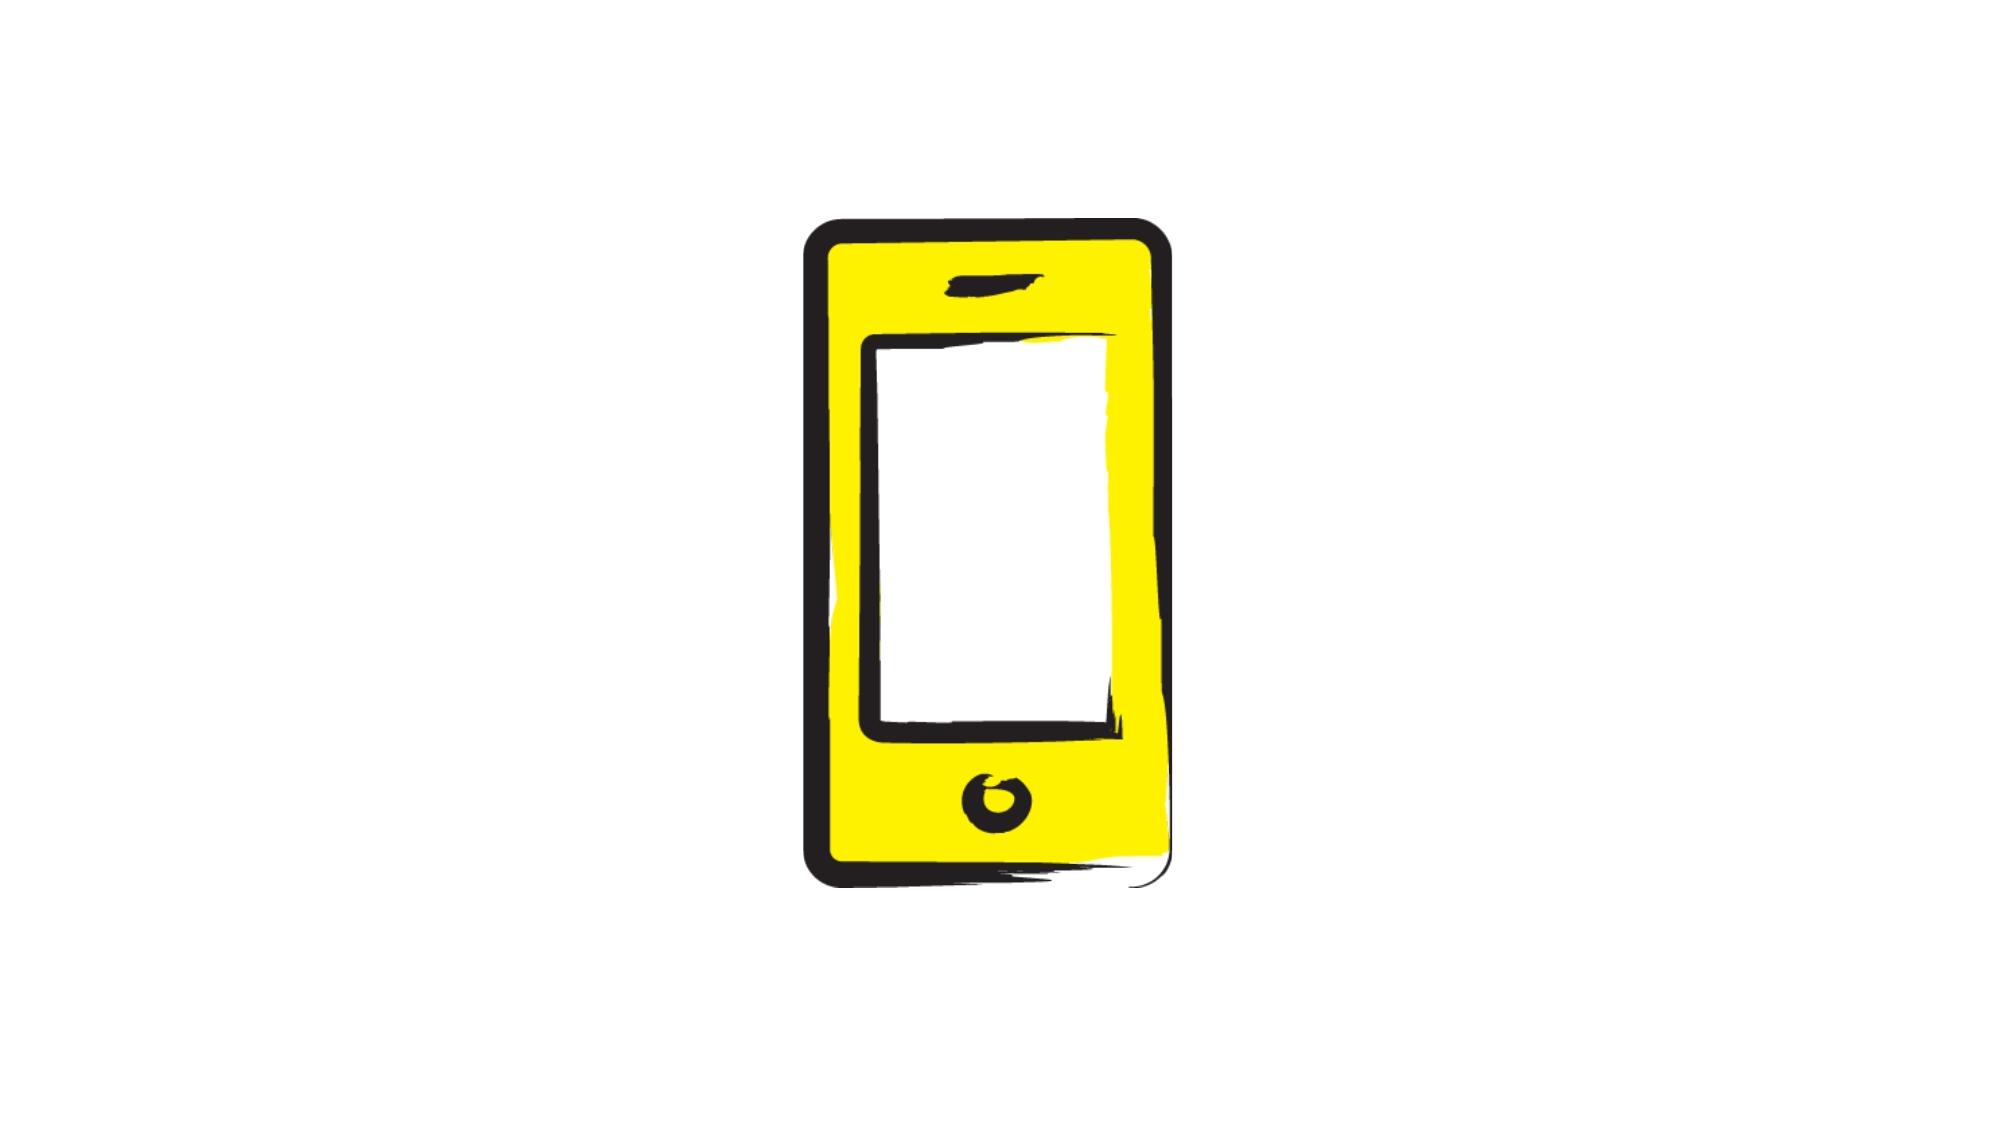 An illustration of a smartphone outlined in a black paintbrush style design with yellow accents.